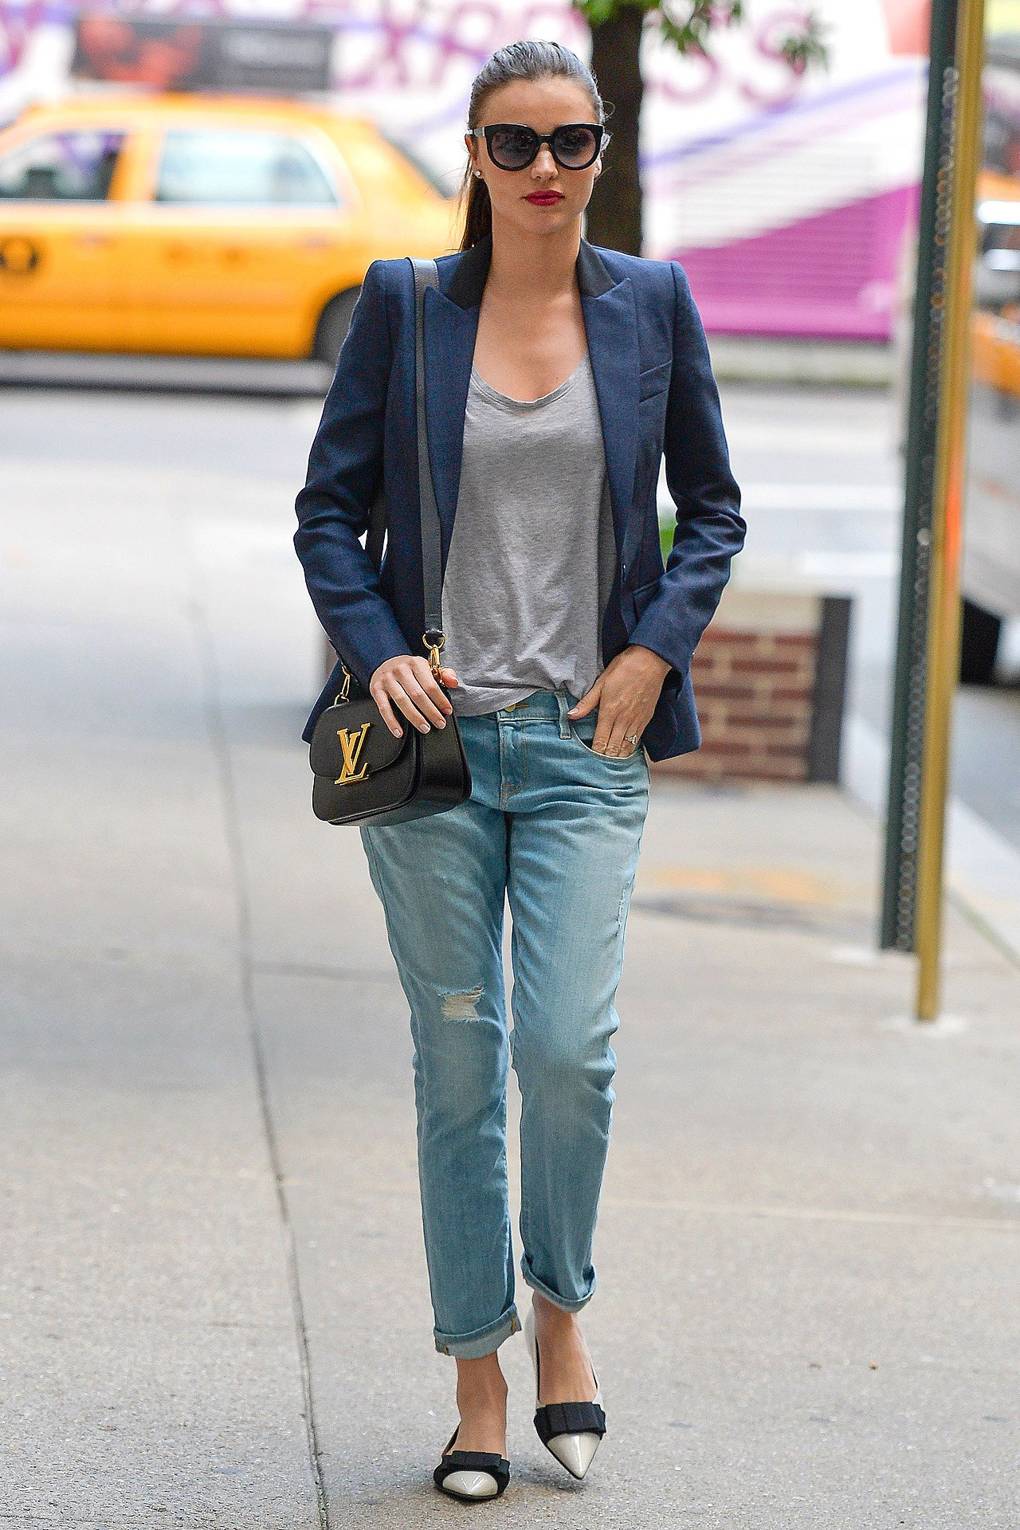 Boyfriend Jeans Outfits Inspiration How To Wear The Trend Glamour Uk